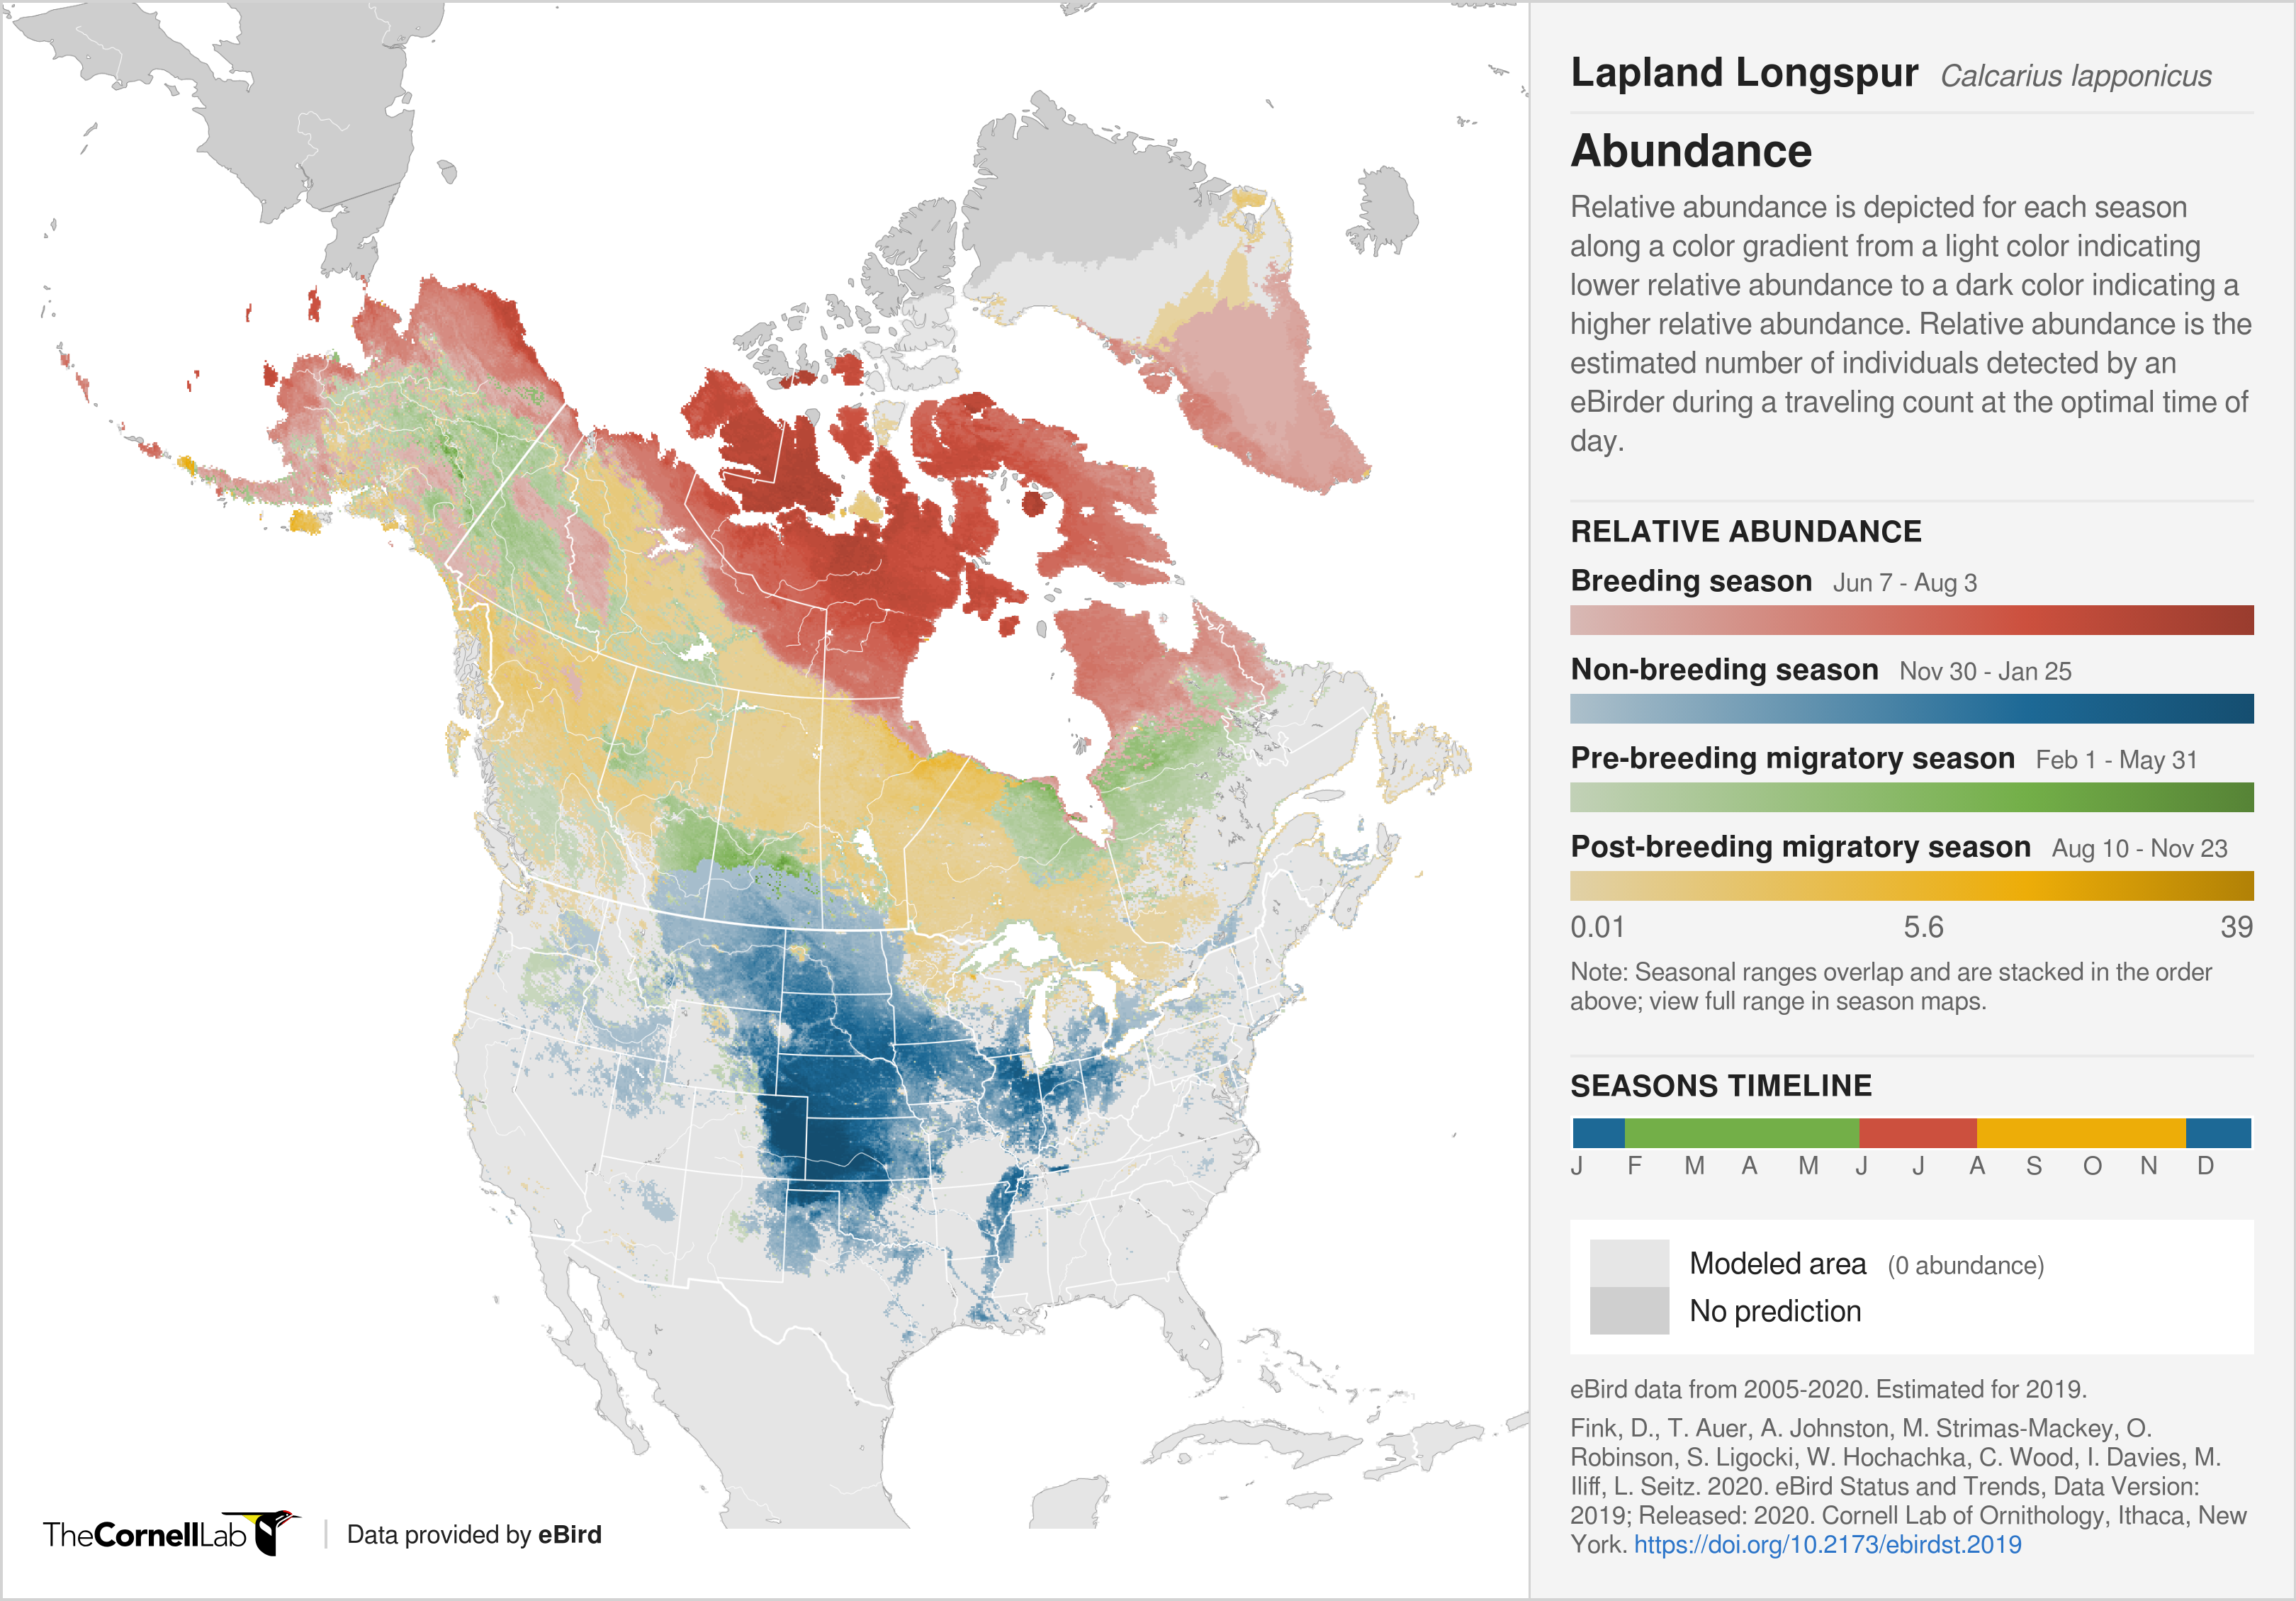 A map of lapland longspur abundance in North America